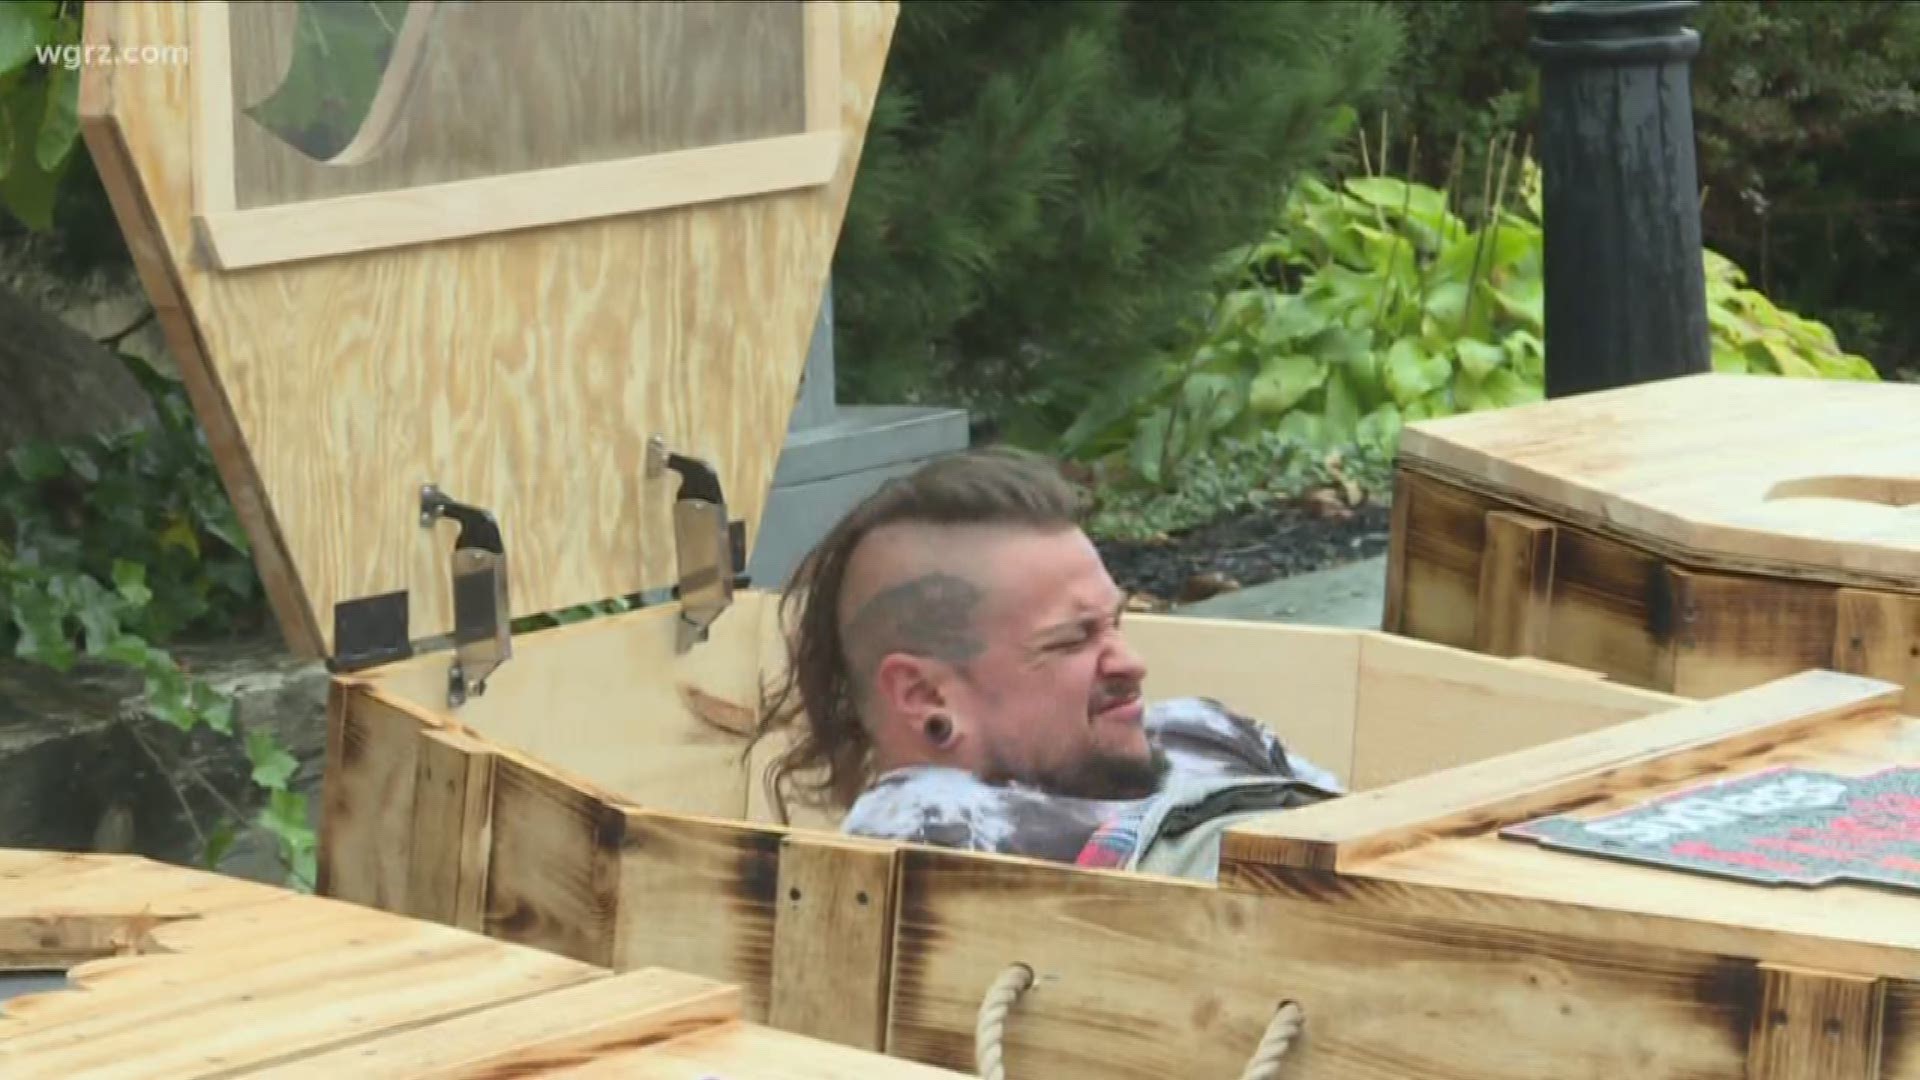 After 30 hours and a series of challenges, a winner was announced in the 2019 Coffin Challenge at Six Flag Darien Lake.